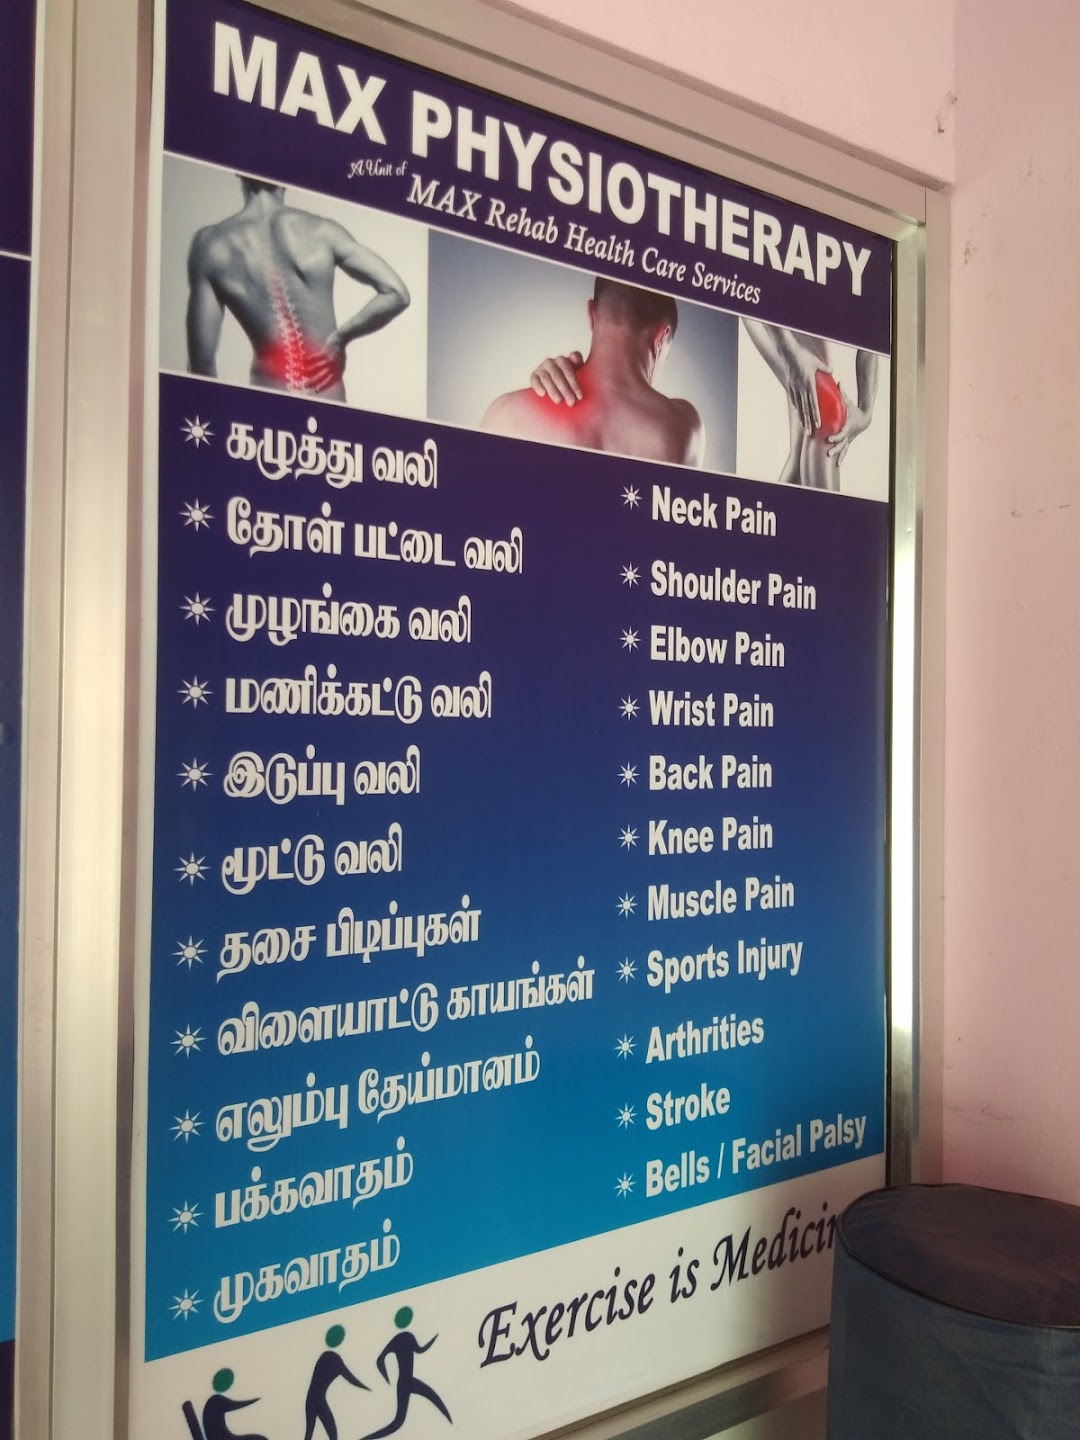 MAX PHYSIOTHERAPY - MAX Rehab Health Care Services